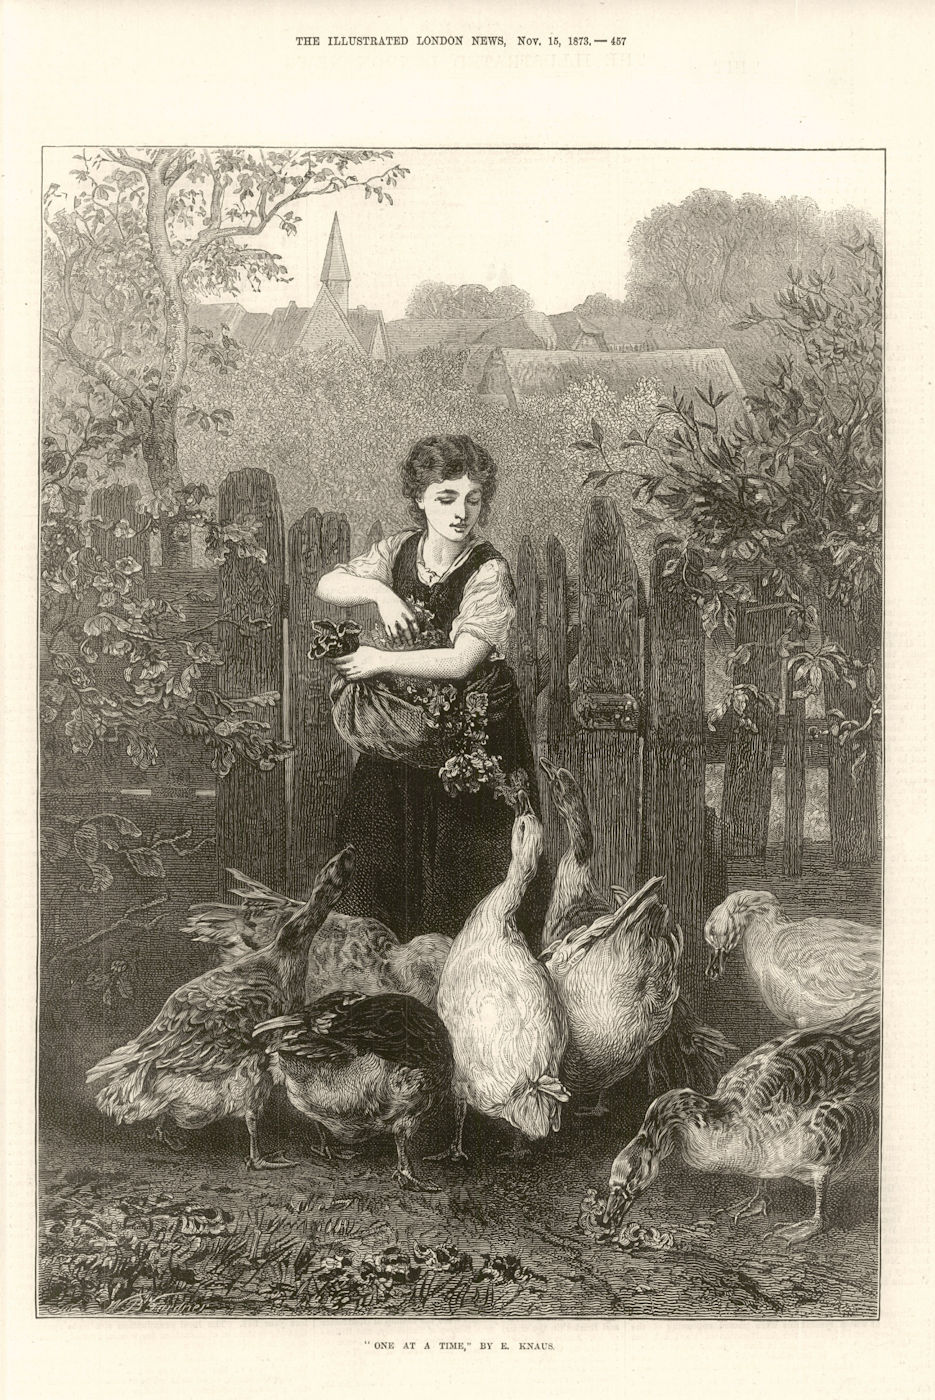 Associate Product " One at a Time ", by E Knaus. Feeding geese. Farming 1873 old antique print